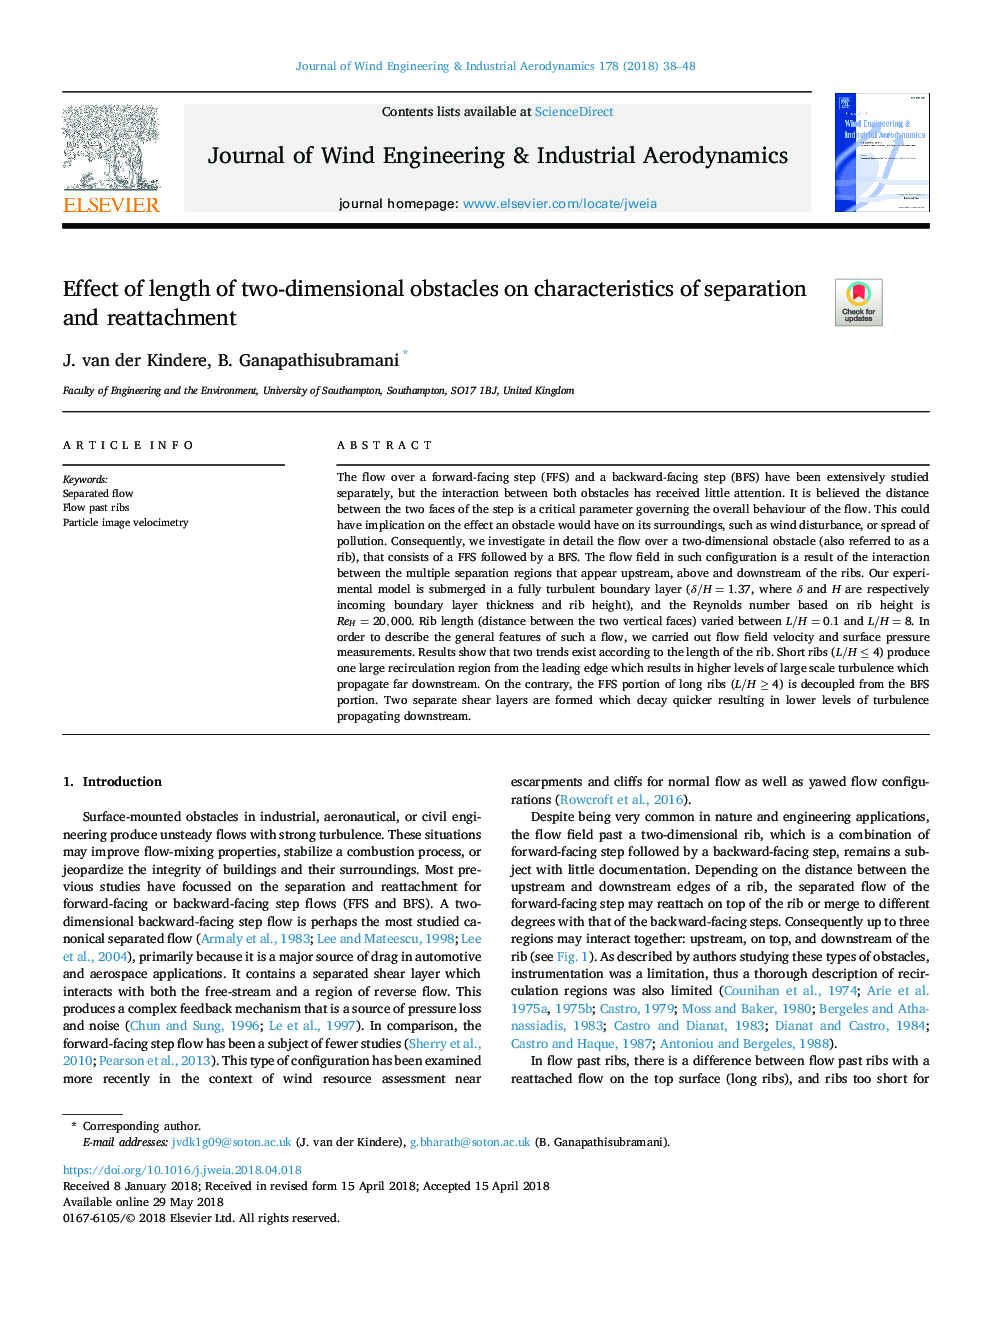 Effect of length of two-dimensional obstacles on characteristics of separation and reattachment